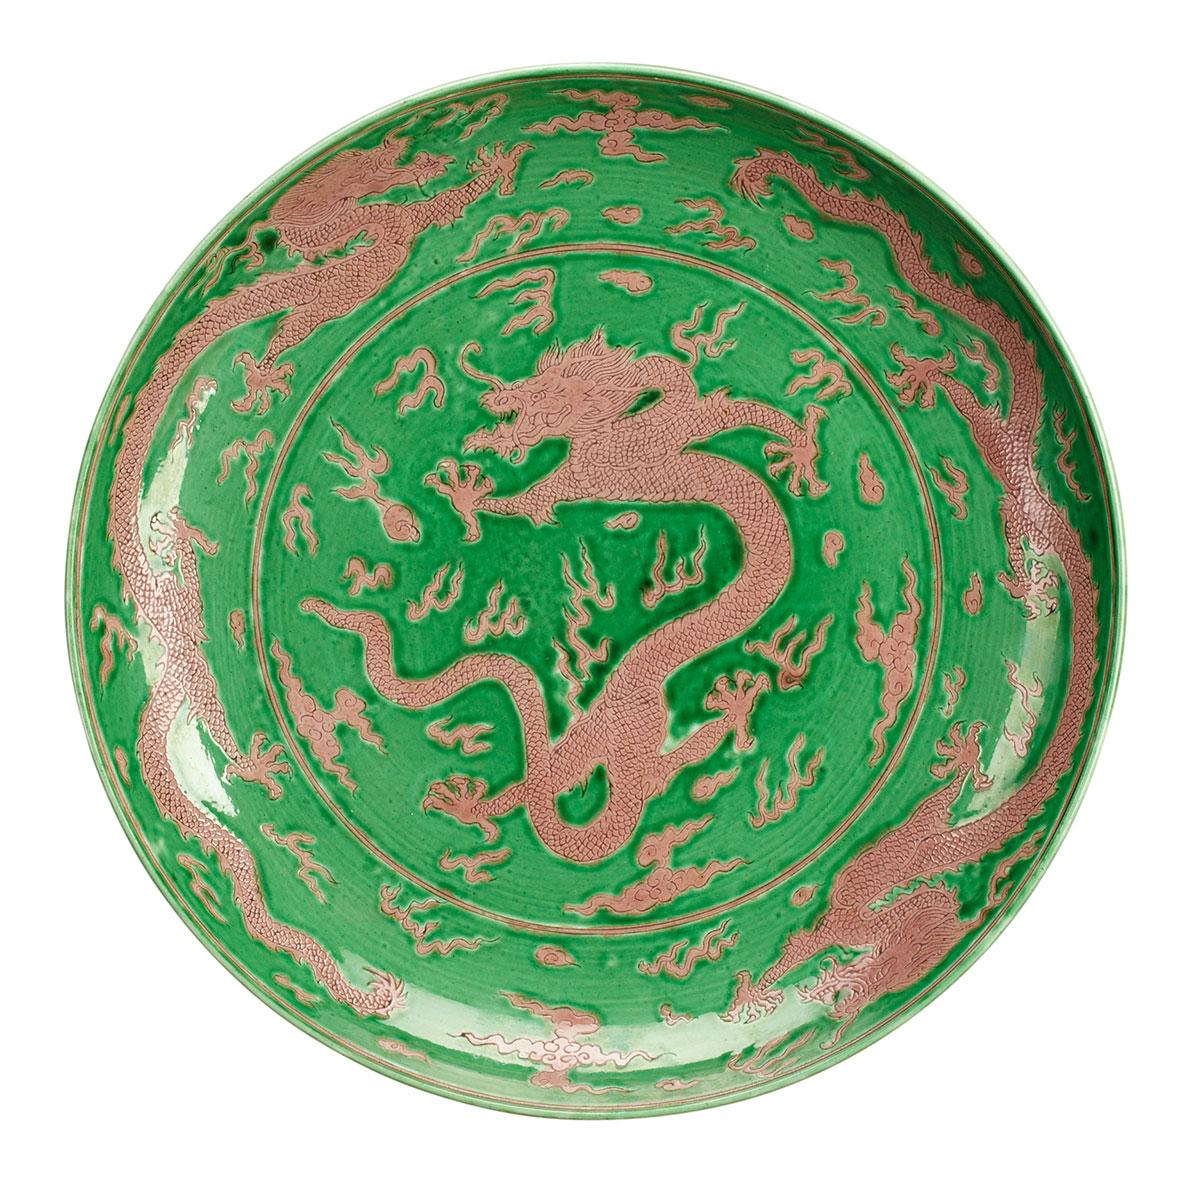 Large Aubergine and Green Glazed Dragon Plate, Kangxi Mark, Qing Dynasty